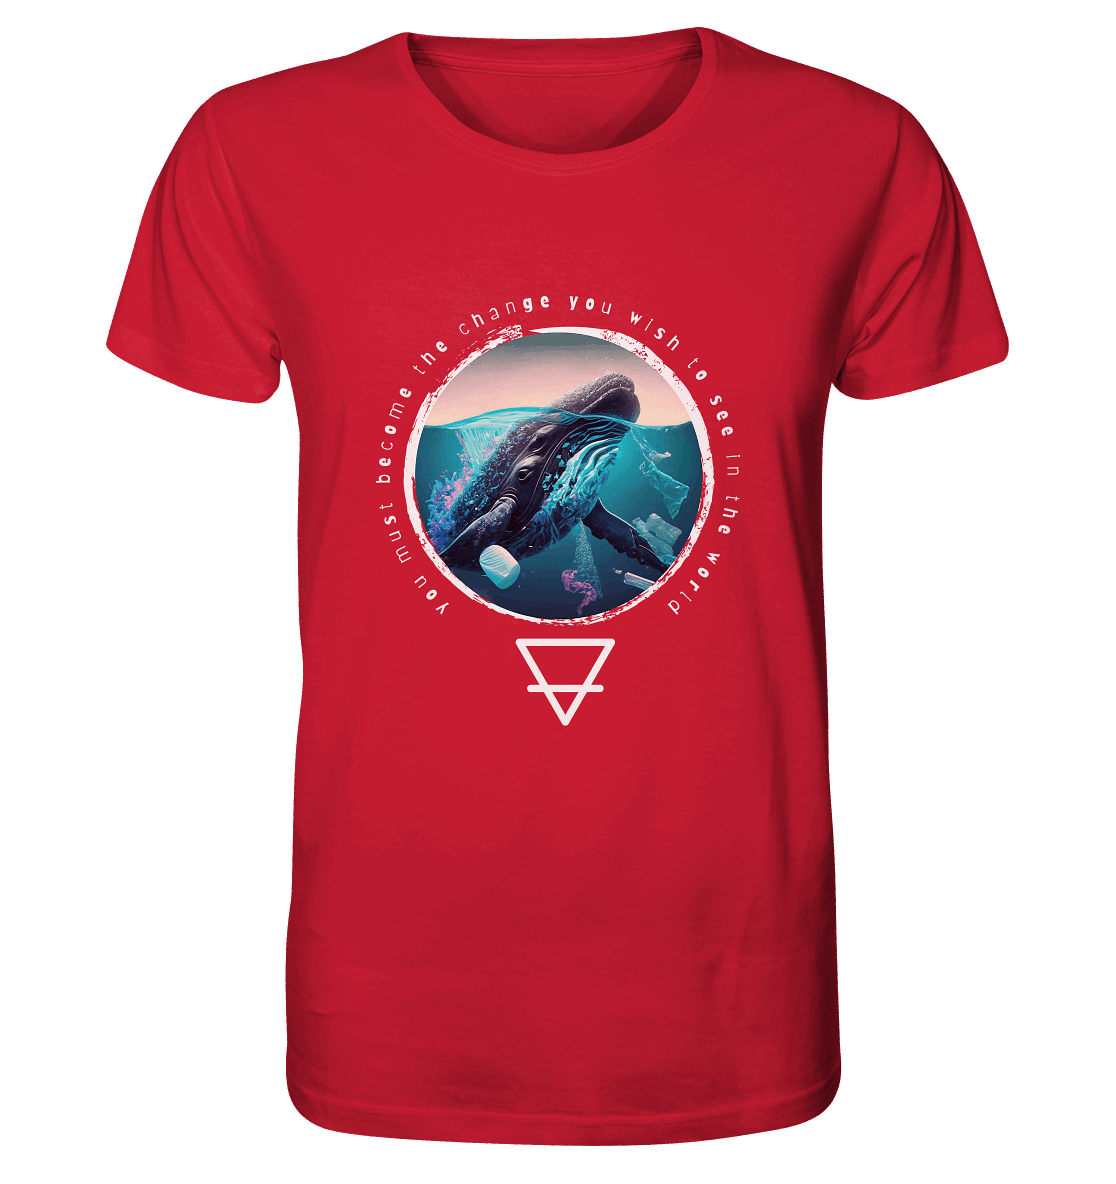 Nature - You must become the change you wish to see in the world  - Organic Shirt